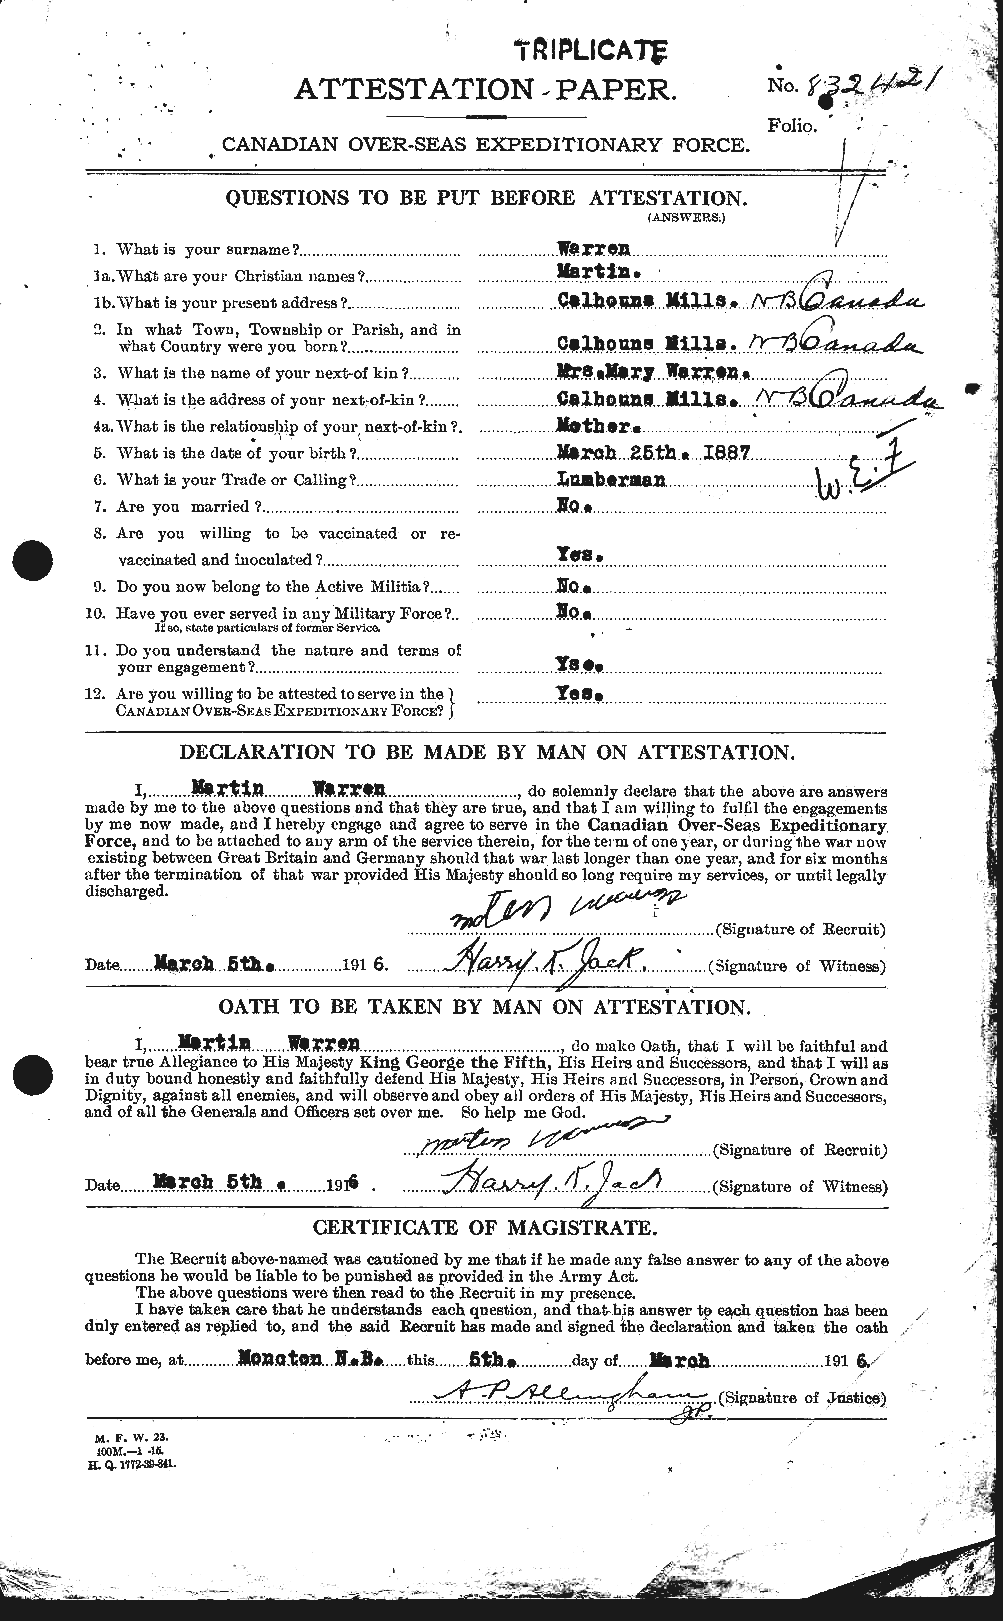 Personnel Records of the First World War - CEF 658599a